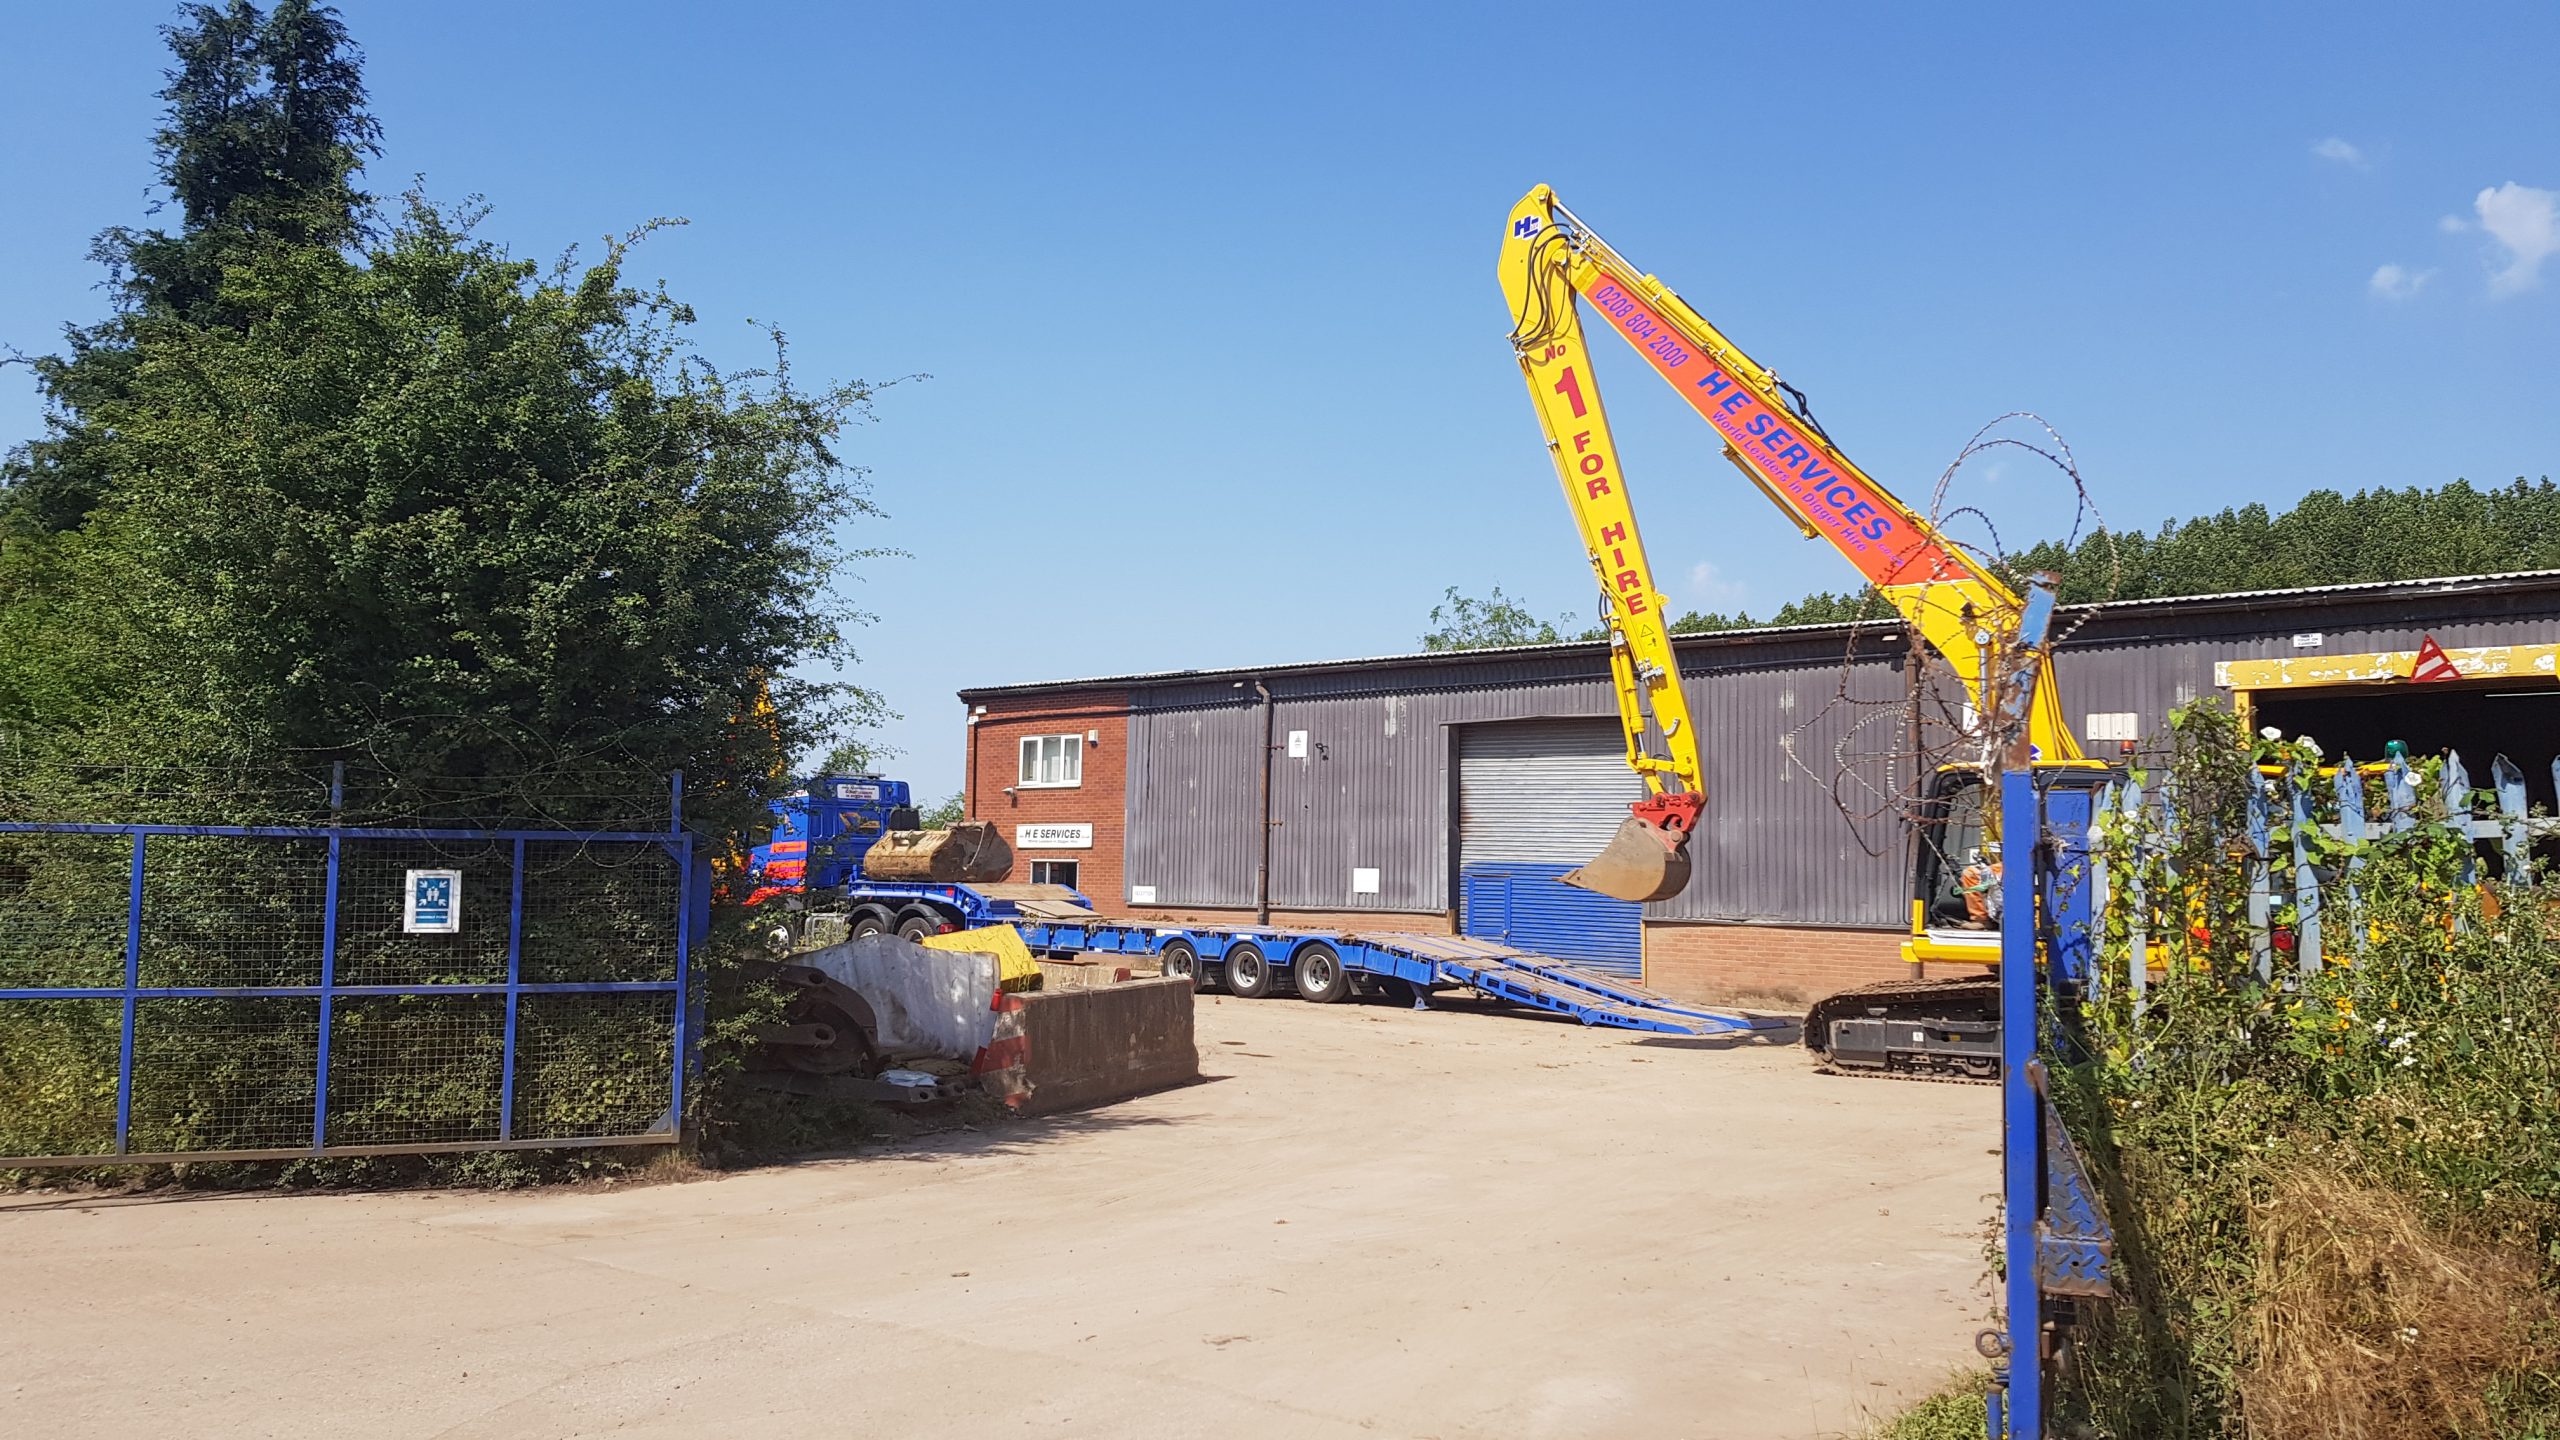 H. E. Services Plant Hire in West Midlands